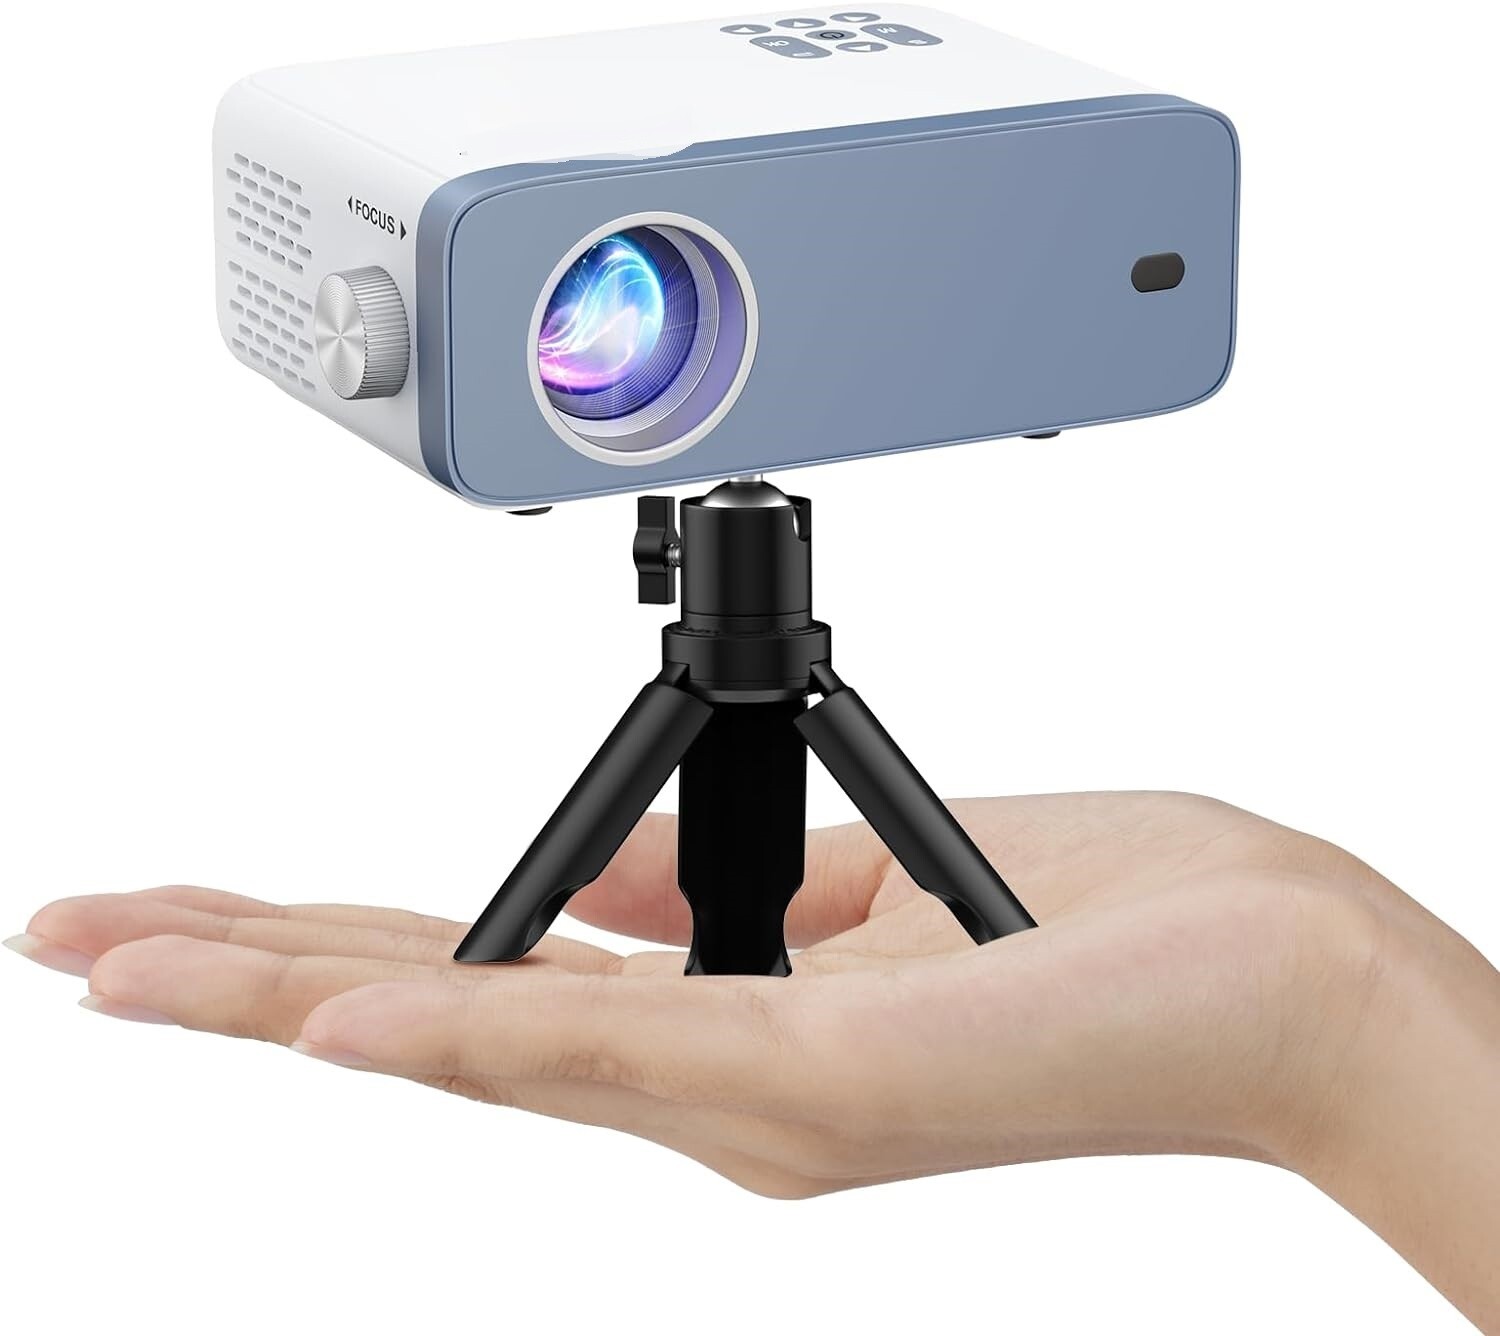 Mini Projector, Upgraded 1080P Full HD 11000L, Video Projector Portable Outdoor Home Theater Movie